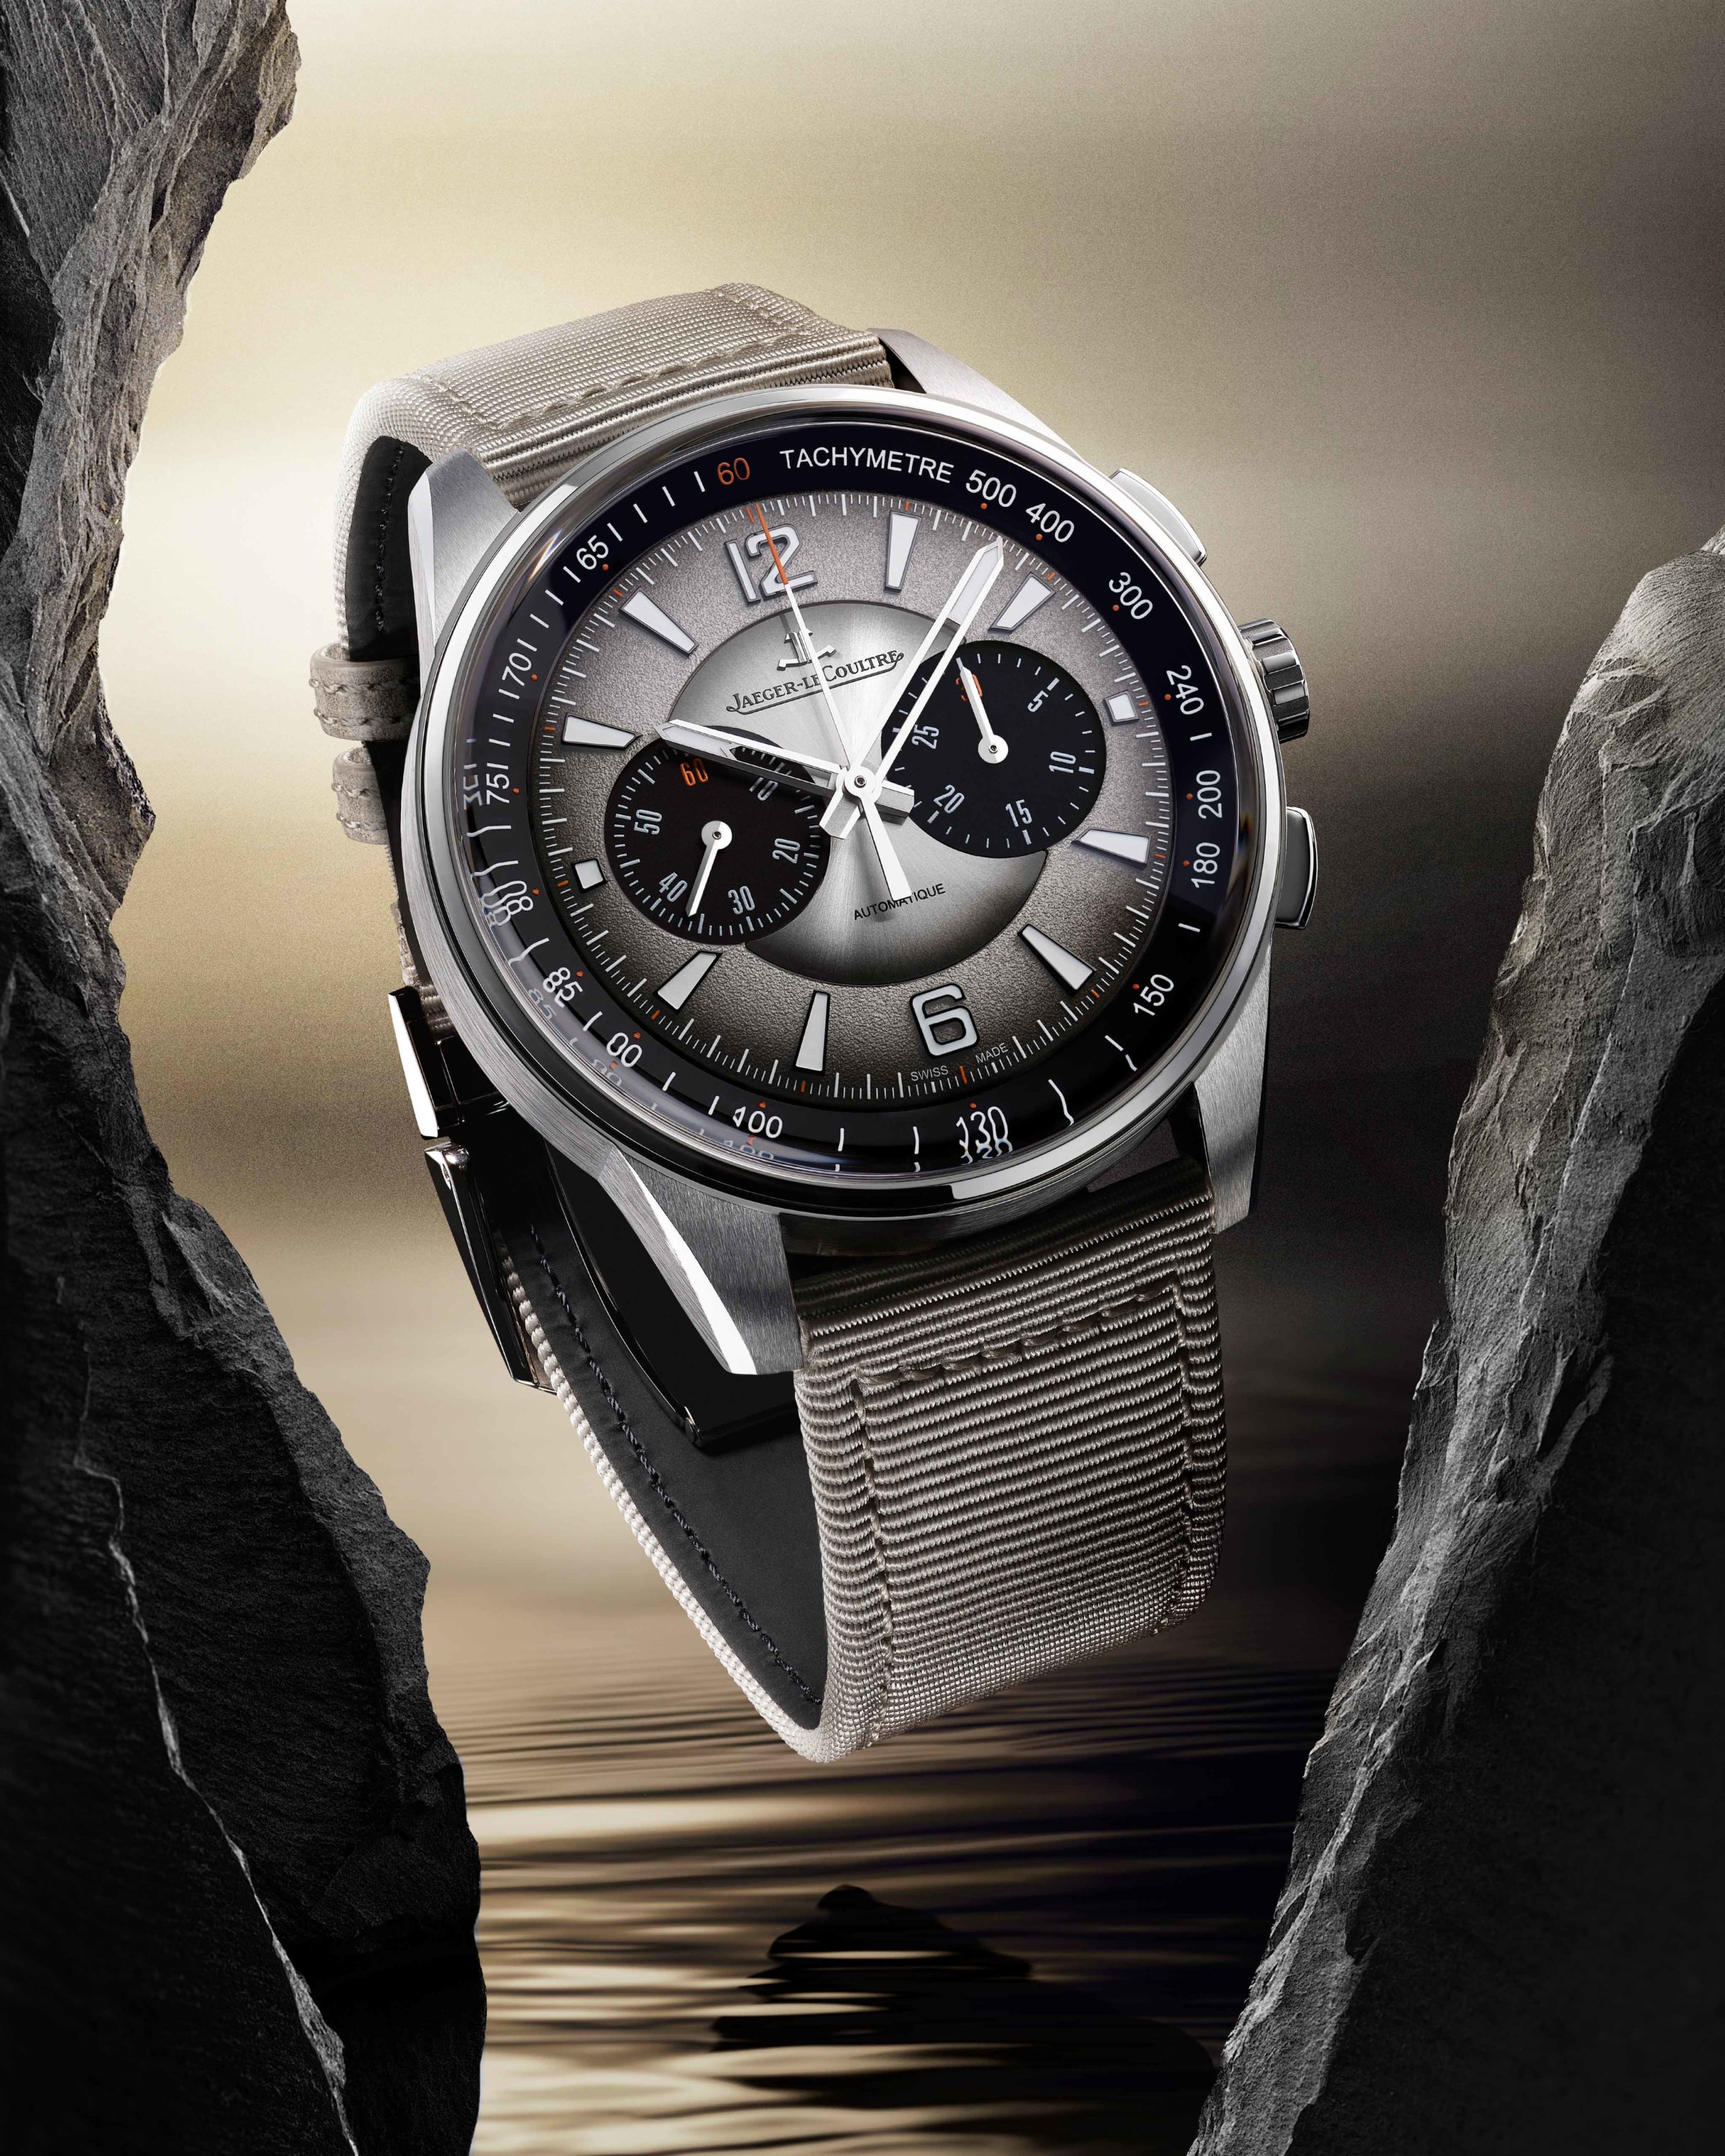 Jaeger-LeCoultre Expands the Polaris Collection with two Artistic Dial Options and New Caliber